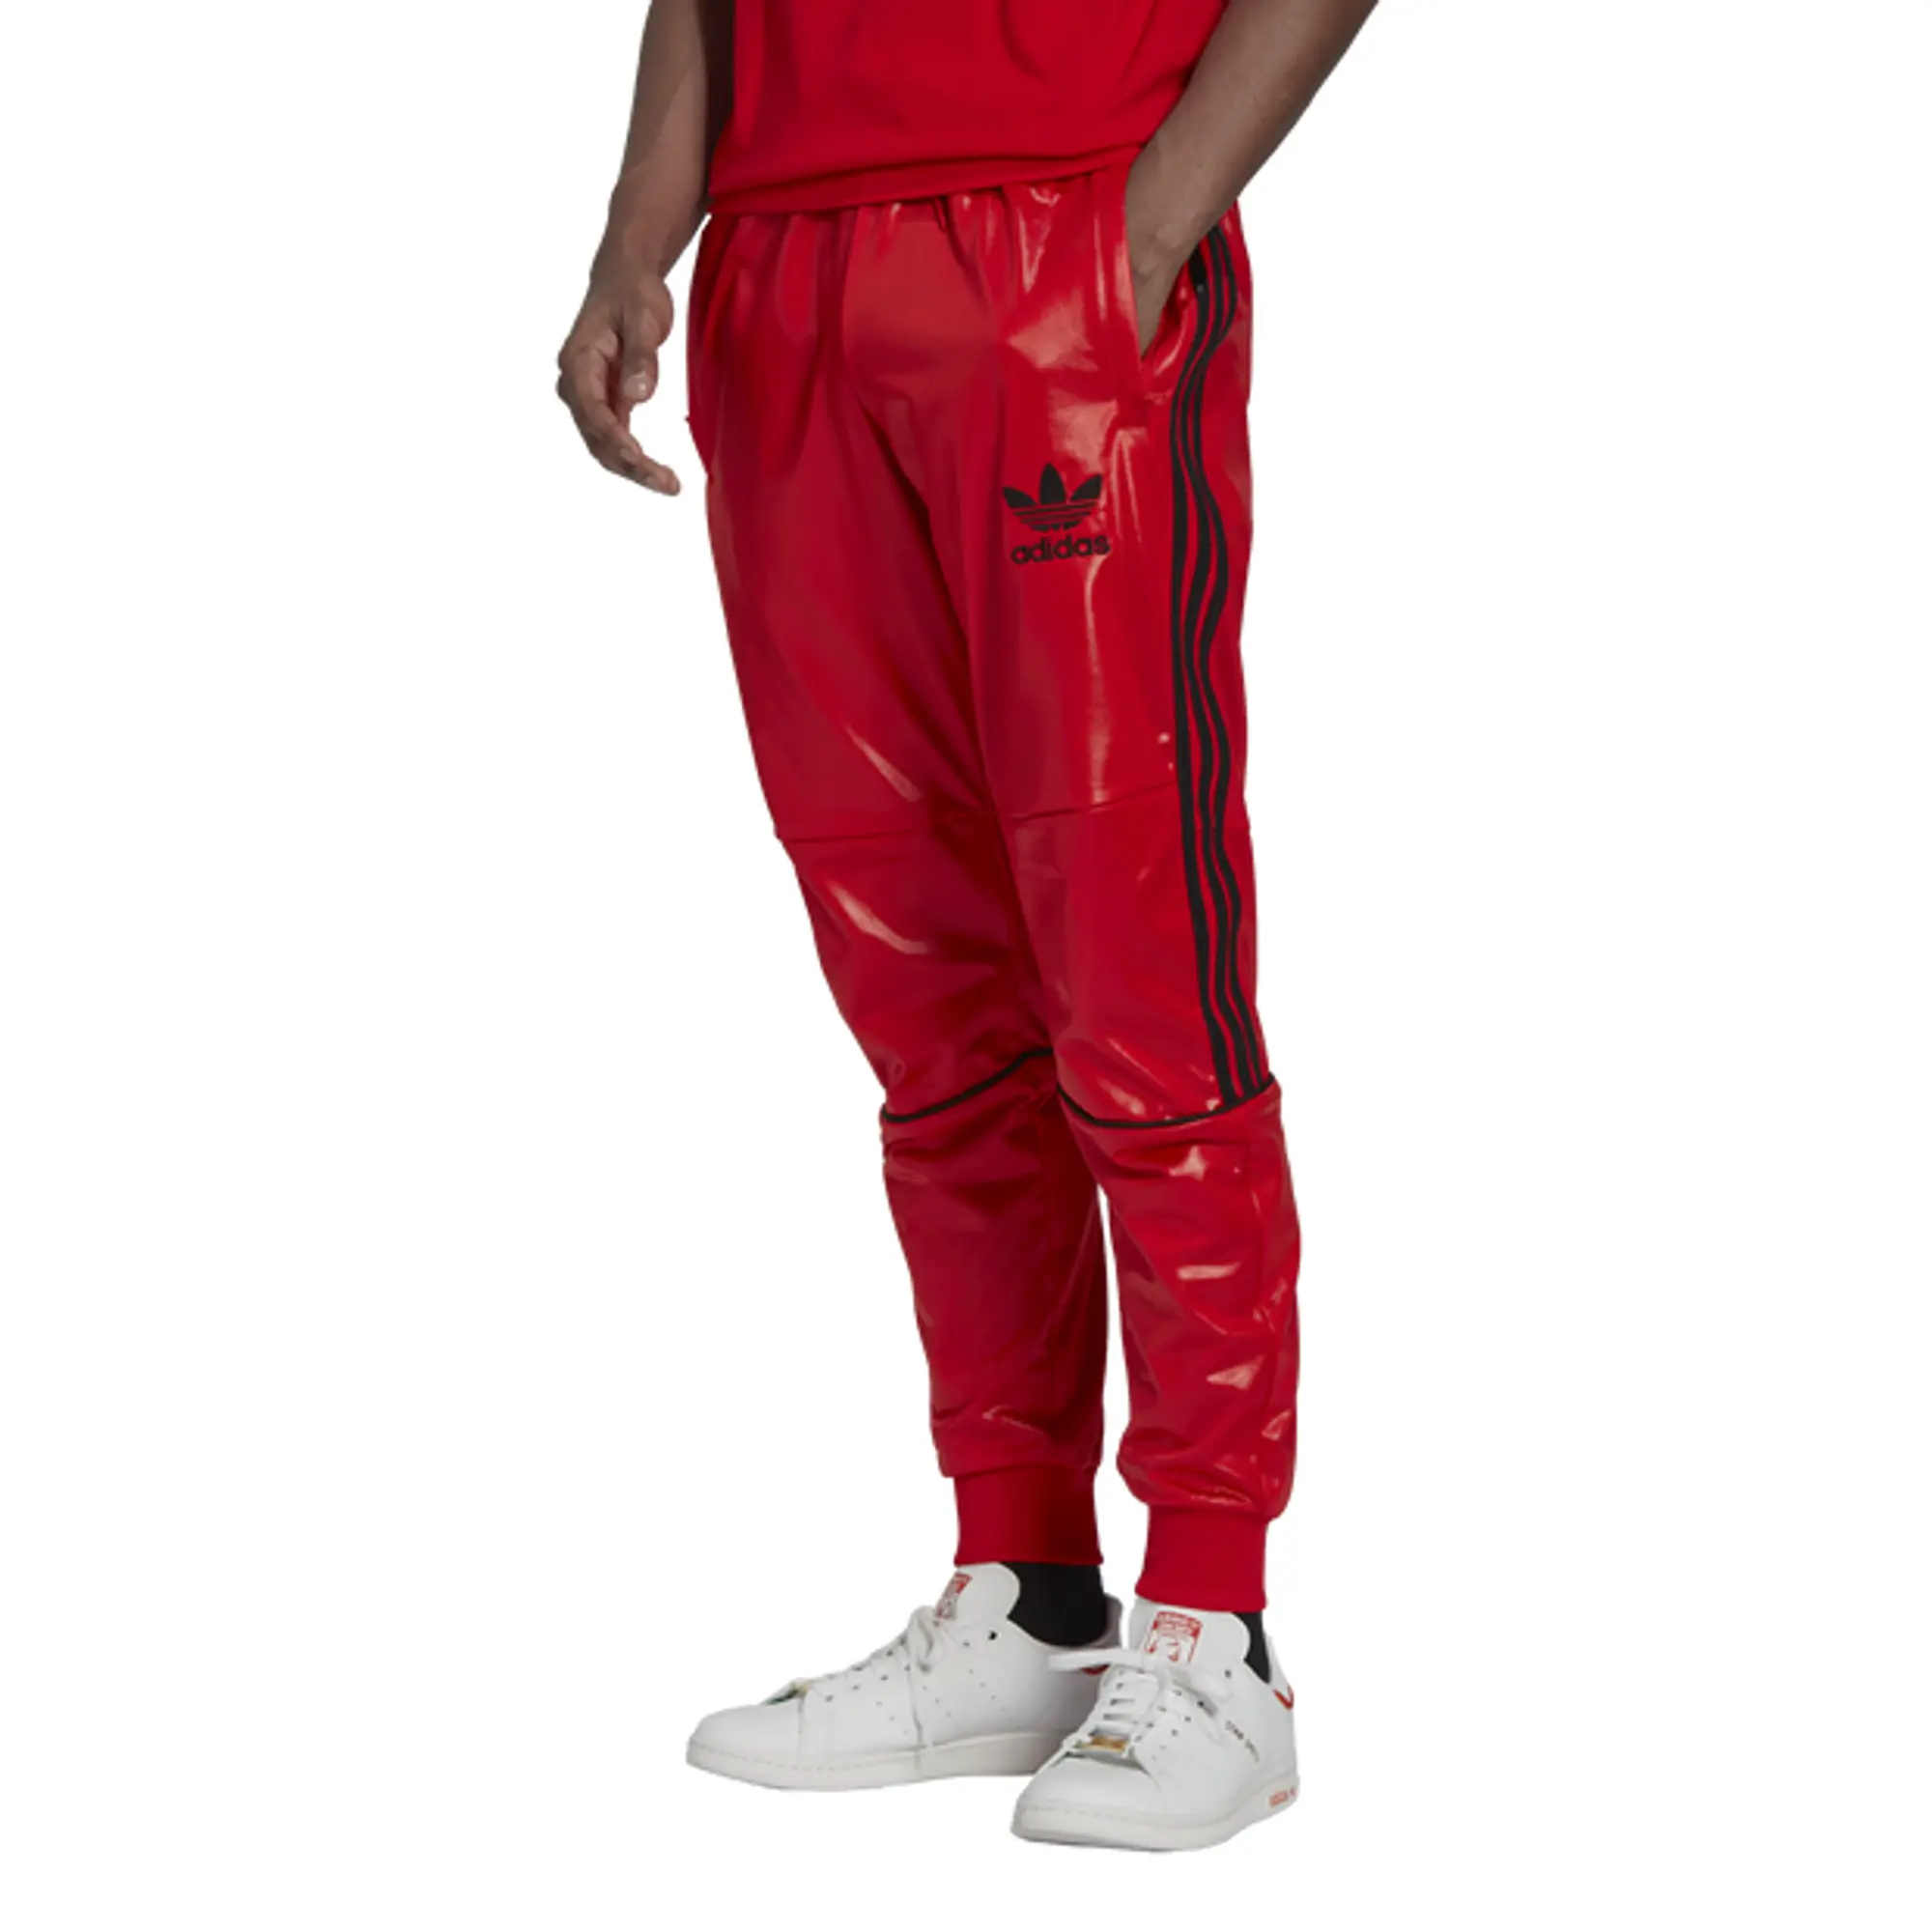 Stay Stylishly Comfortable with the adidas Chile20 Tracksuit Bottoms - Red, HR4293